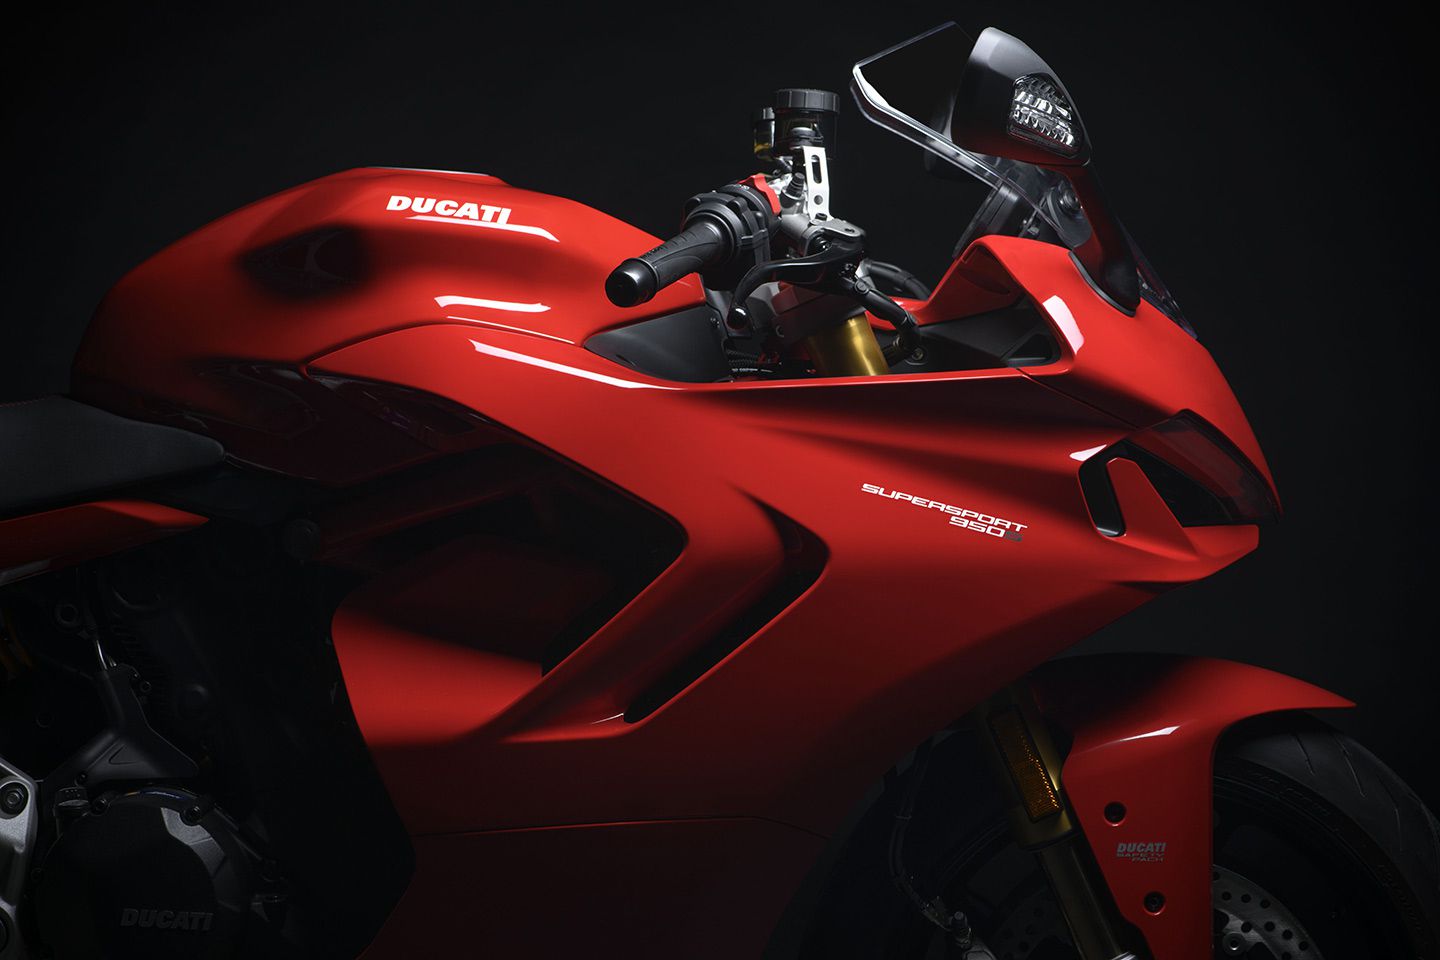 The SuperSport 950’s fairings were updated for the 2021 model year and feature subtle nods to Ducati’s Panigale V4.